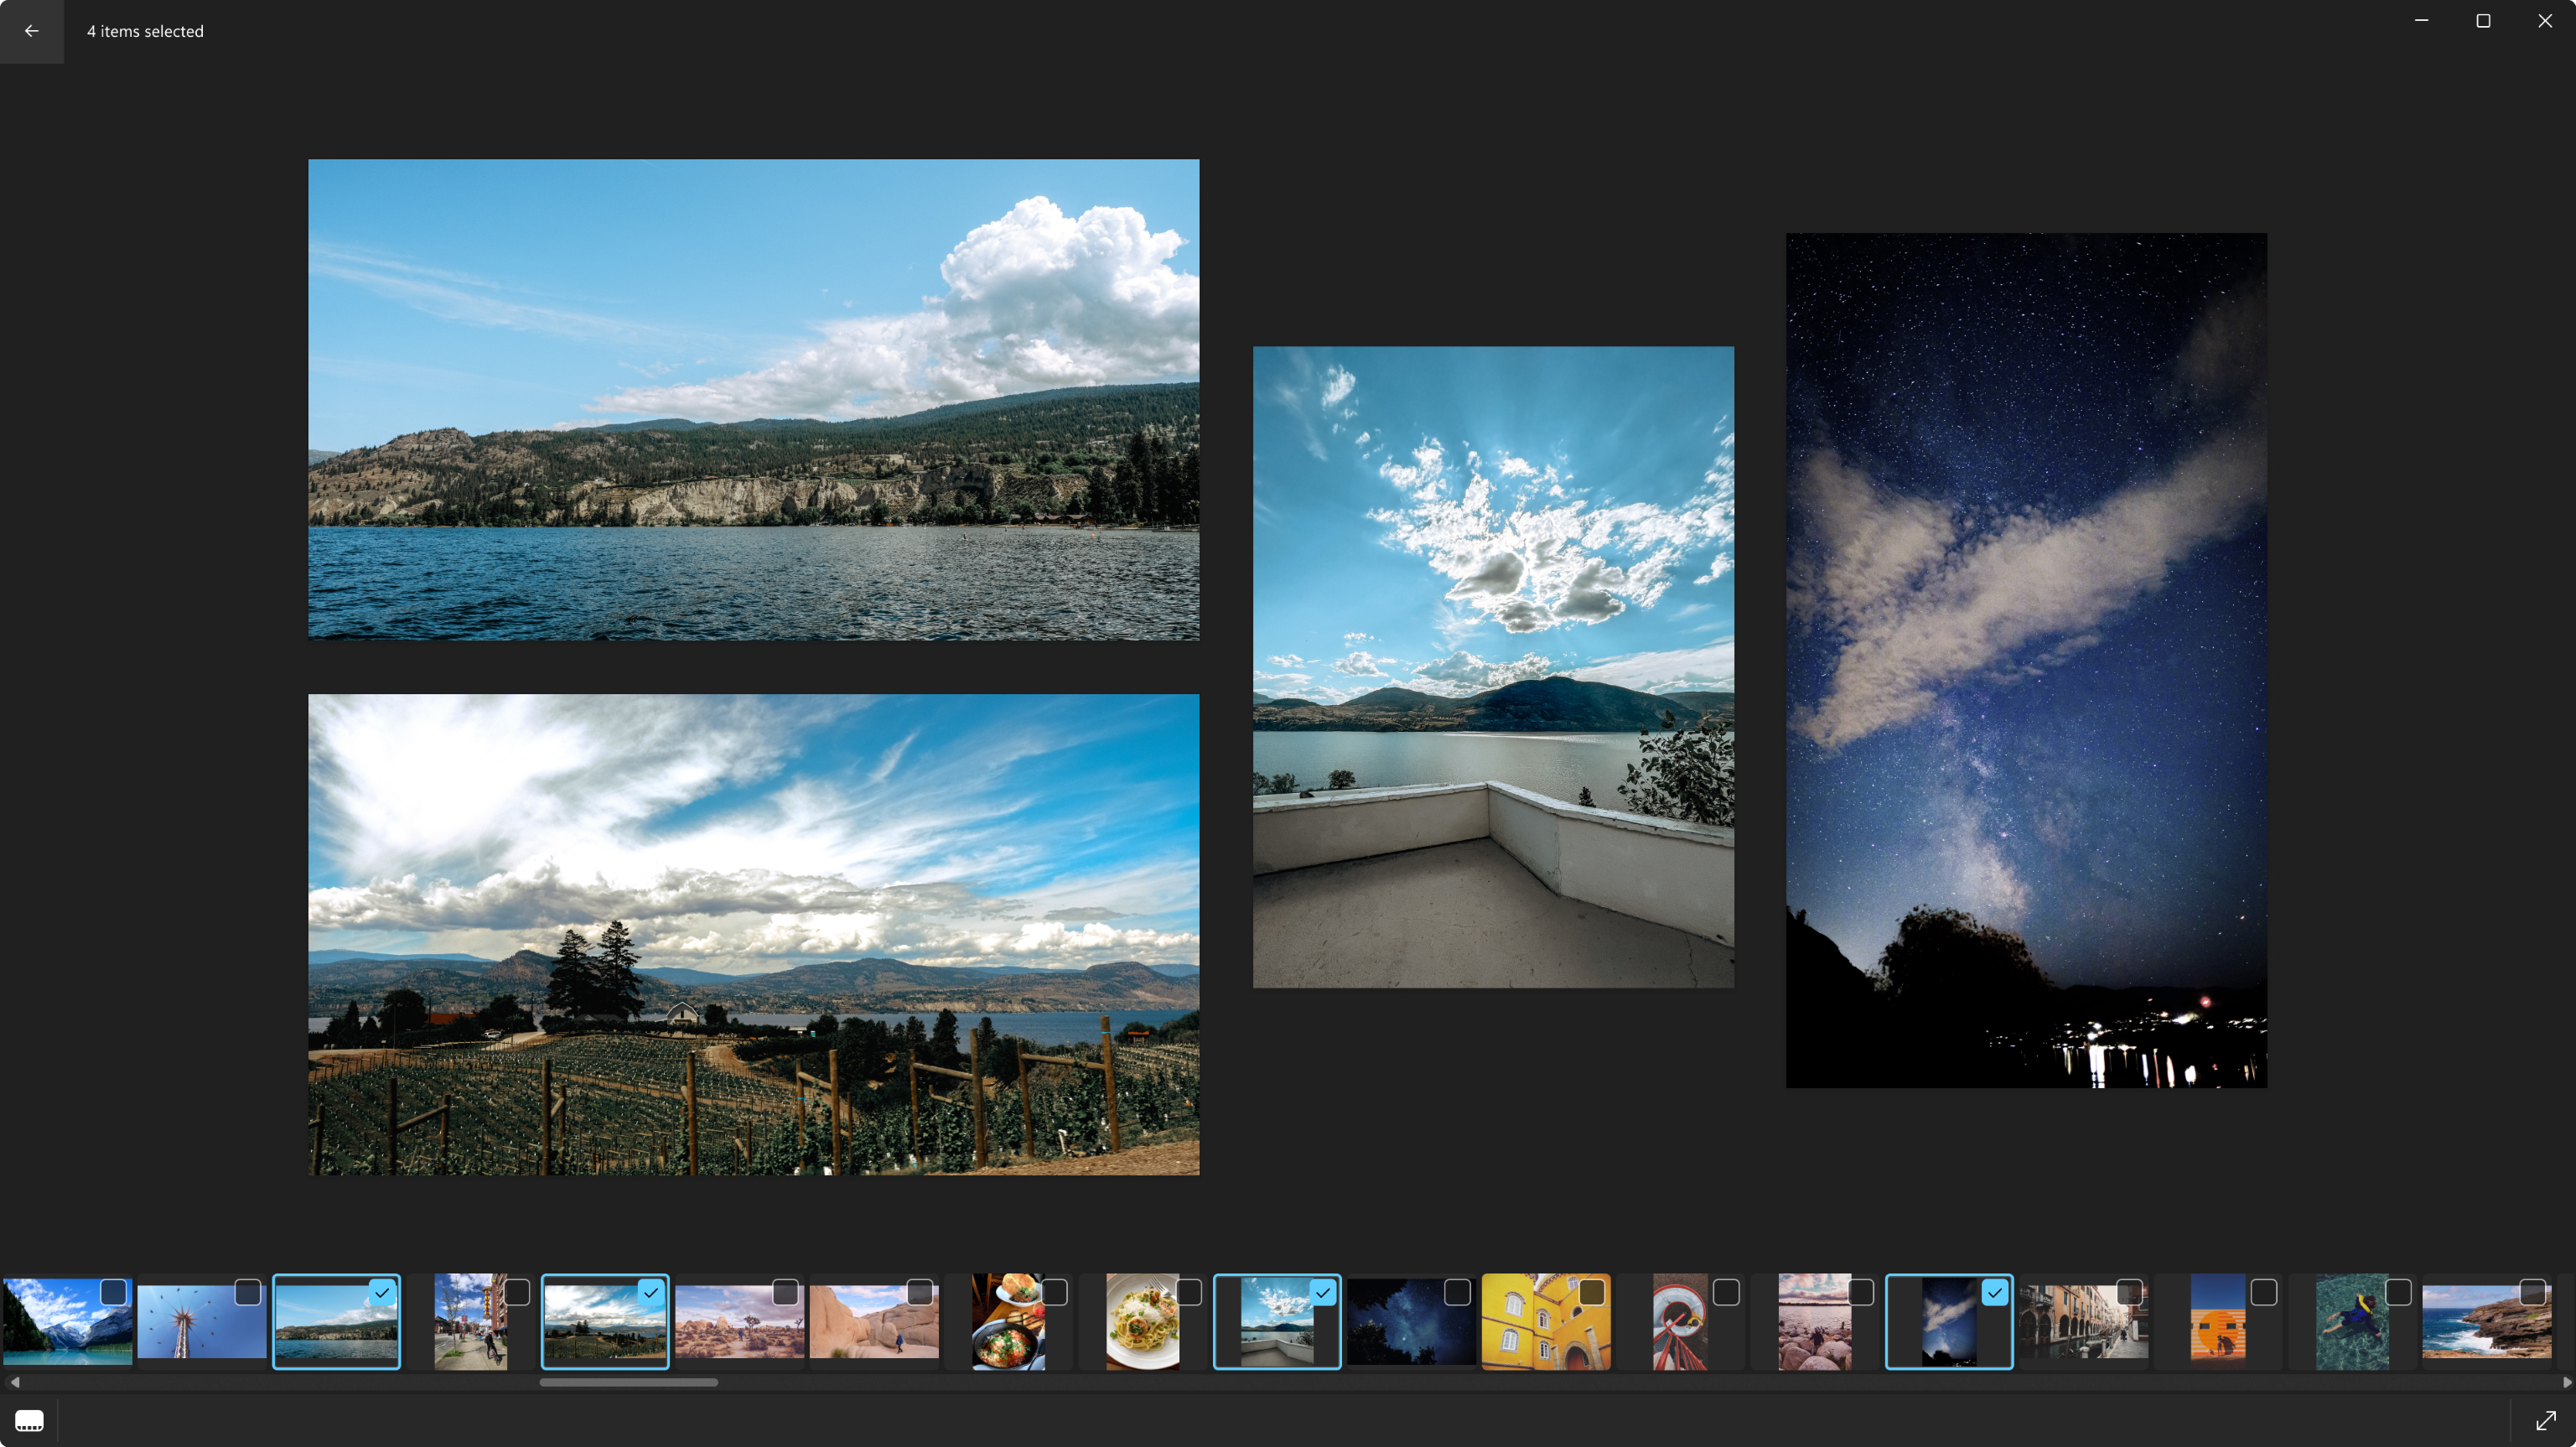 Compare several photos and videos in the same app window using multi-view mode.